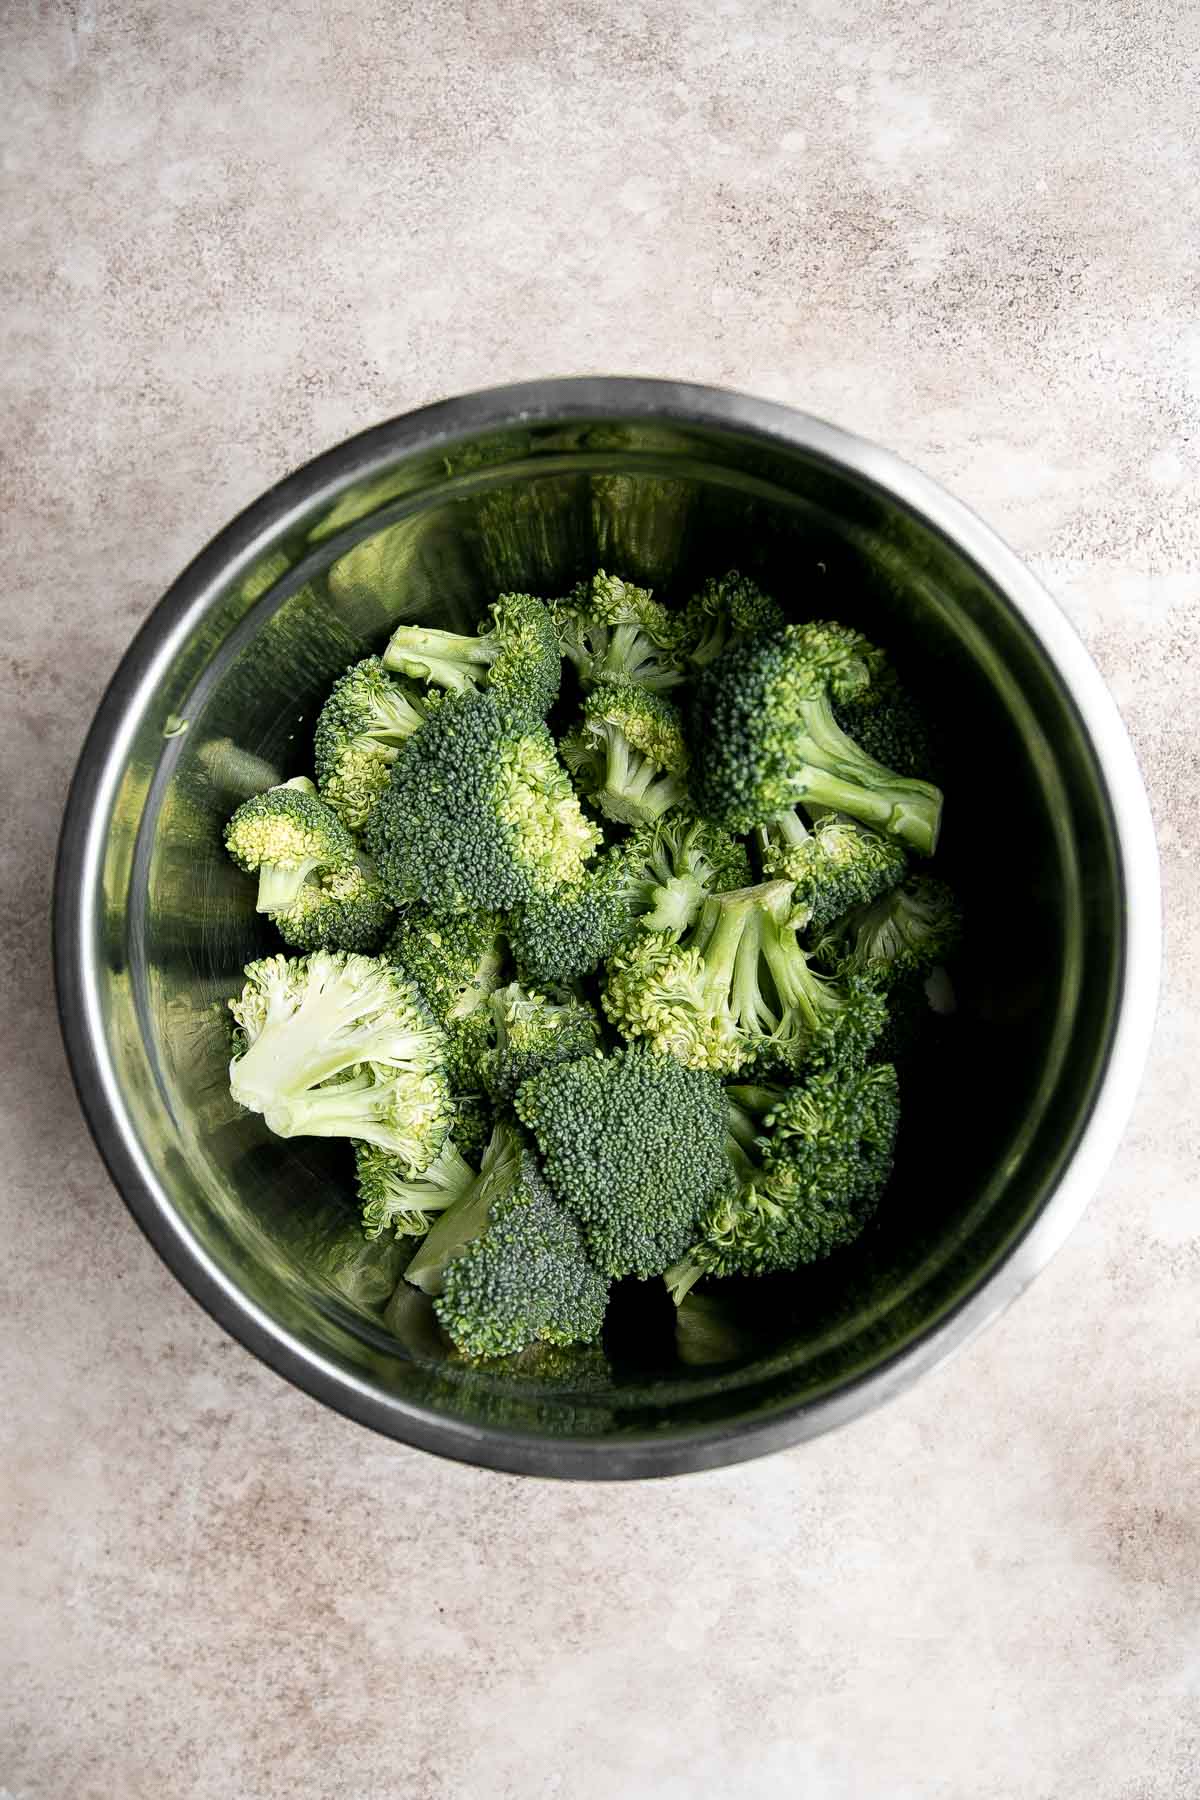 Balsamic Roasted Broccoli is a quick easy side dish made with tender, crispy broccoli tossed in a flavorful 5-ingredient glaze and is ready in 25 minutes. | aheadofthyme.com